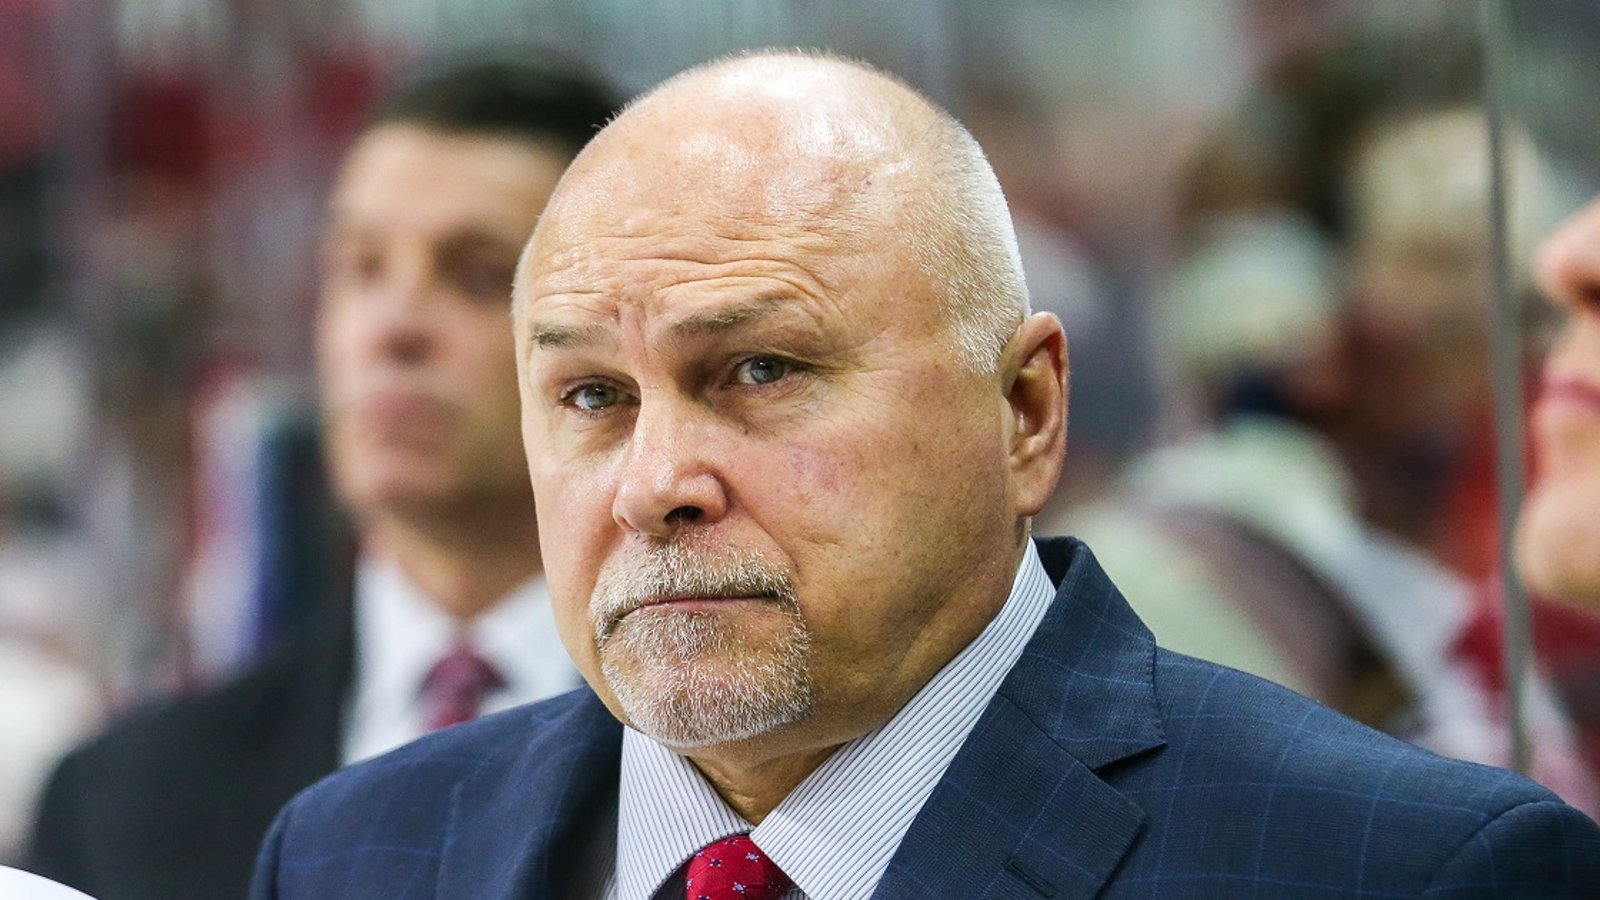 Barry Trotz paints a target on Tavares' back ahead of match up against Toronto.